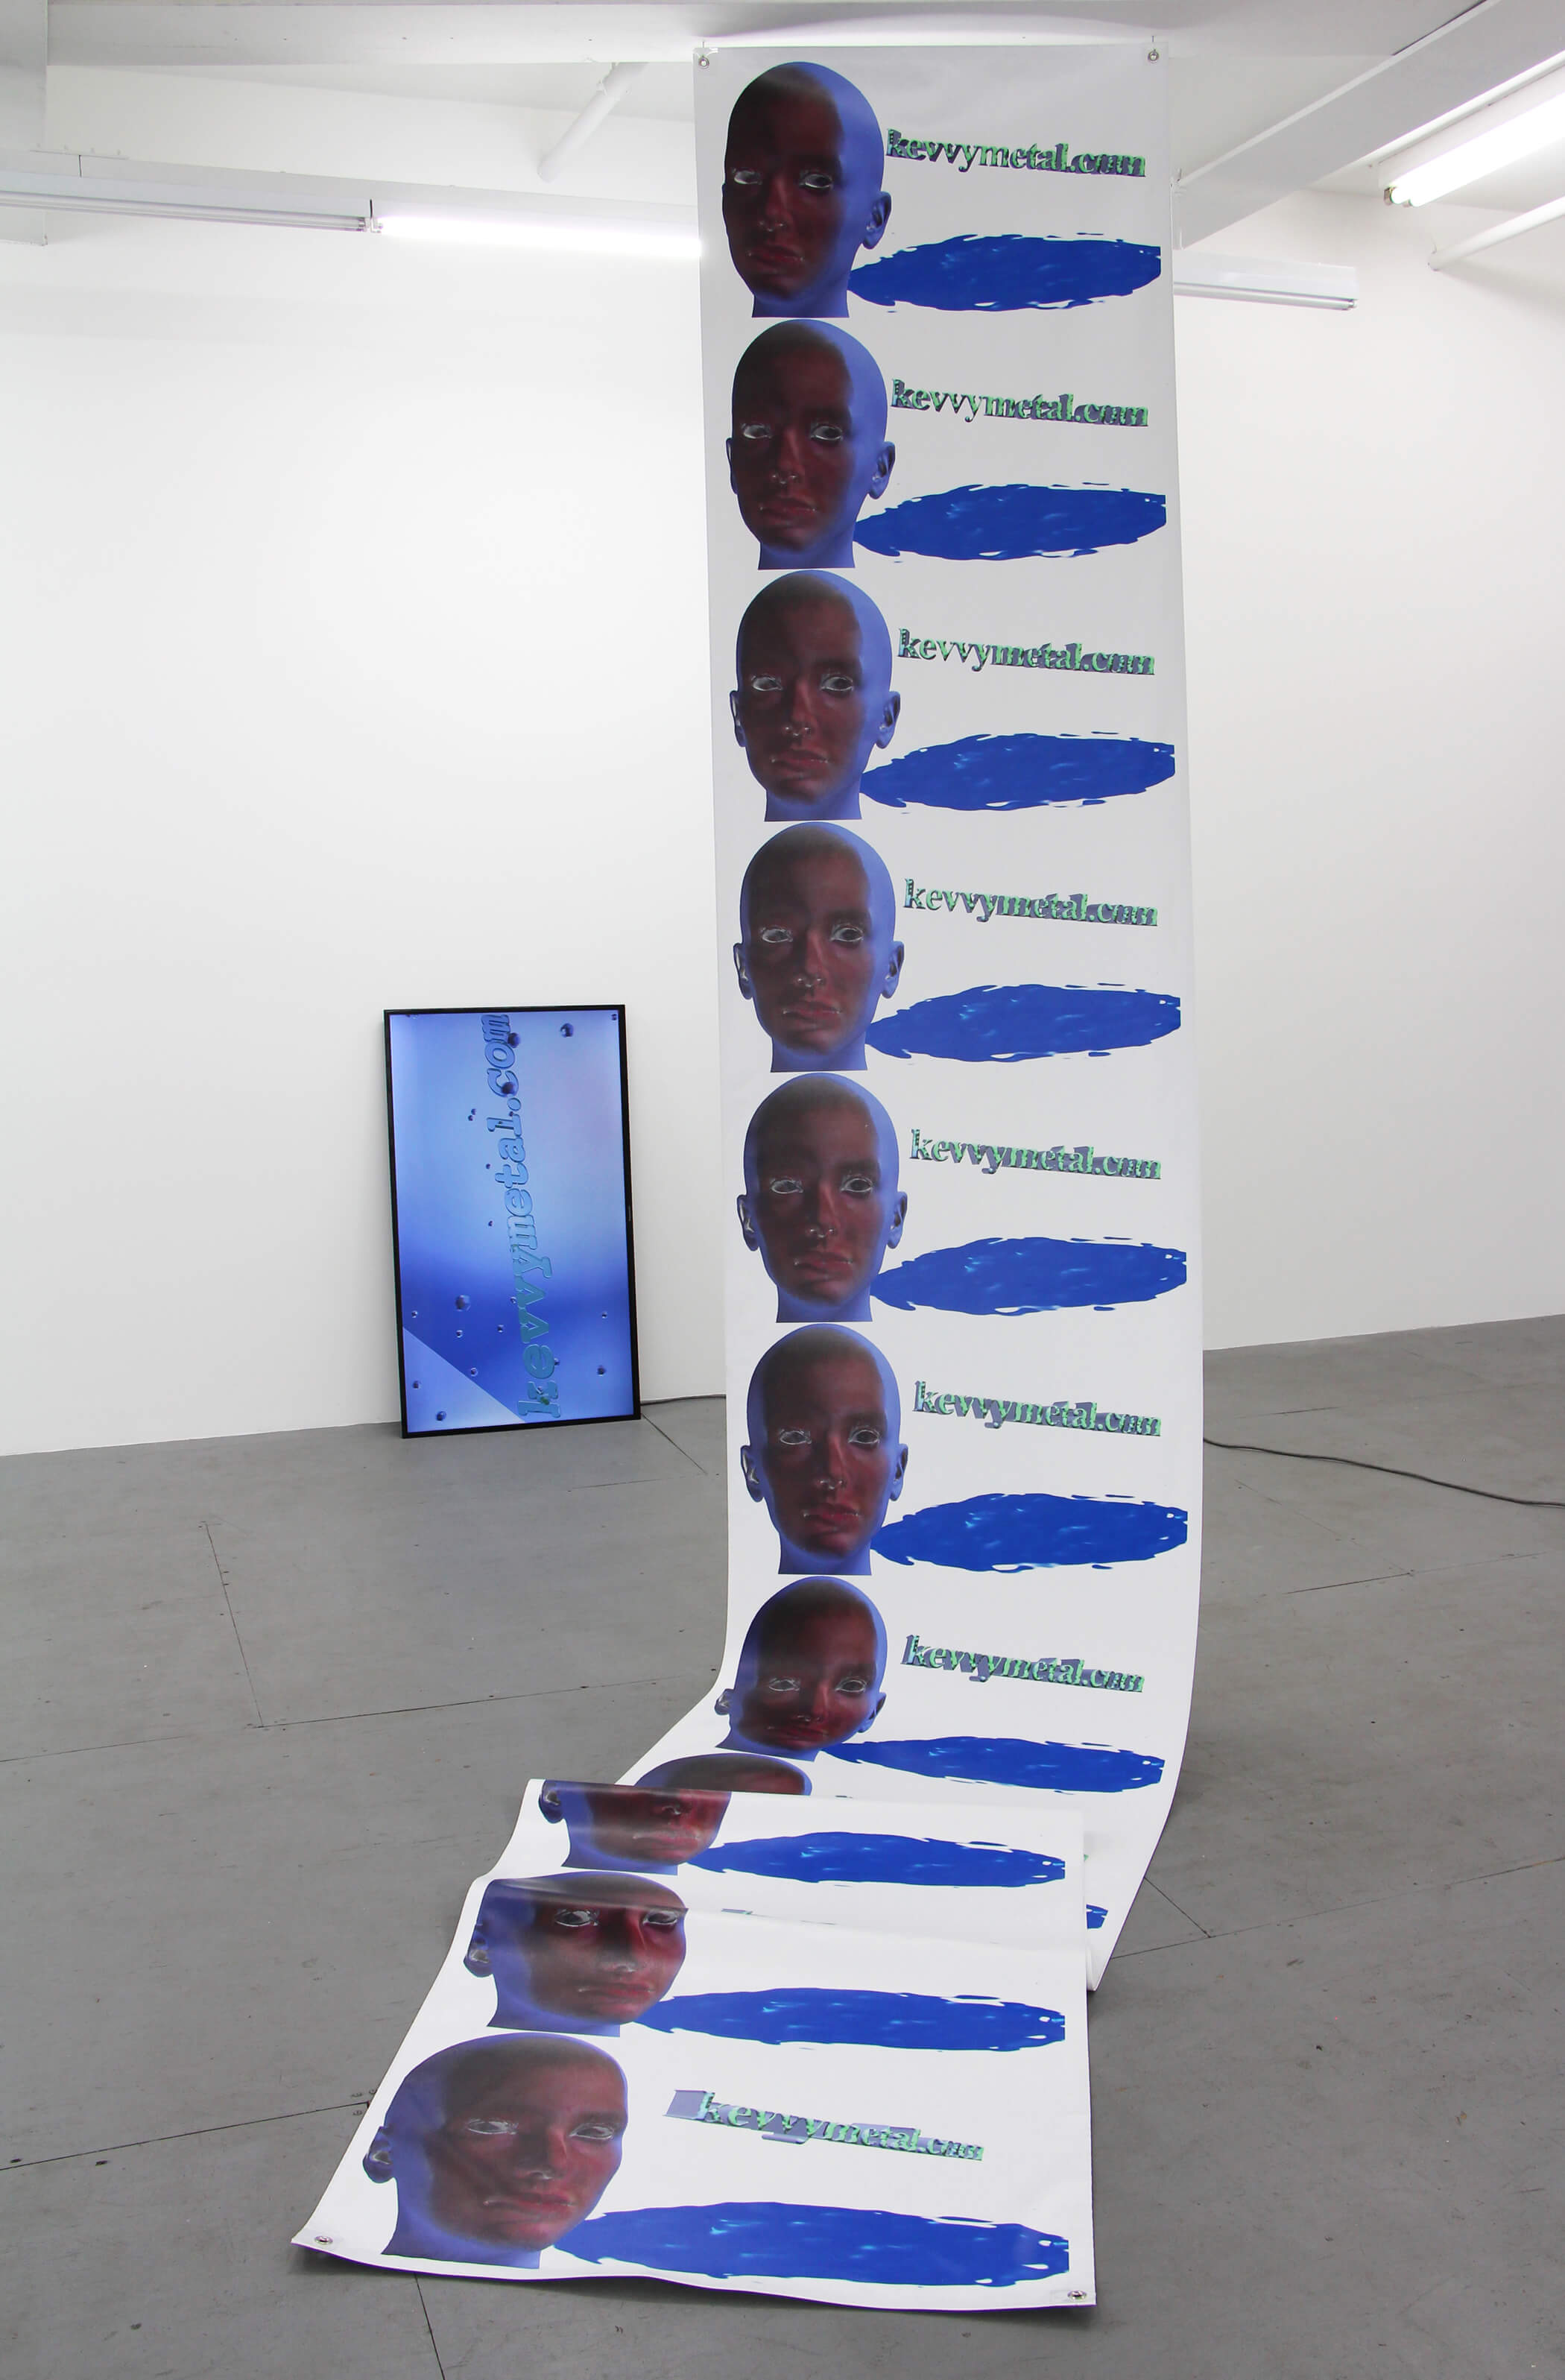 Kevin Reuning, "kevvymetal.com" and "kevvymetal.com (GIF I)", 2015, single-channel HD video, archival ink on vinyl (228 x 36 inches), installation view